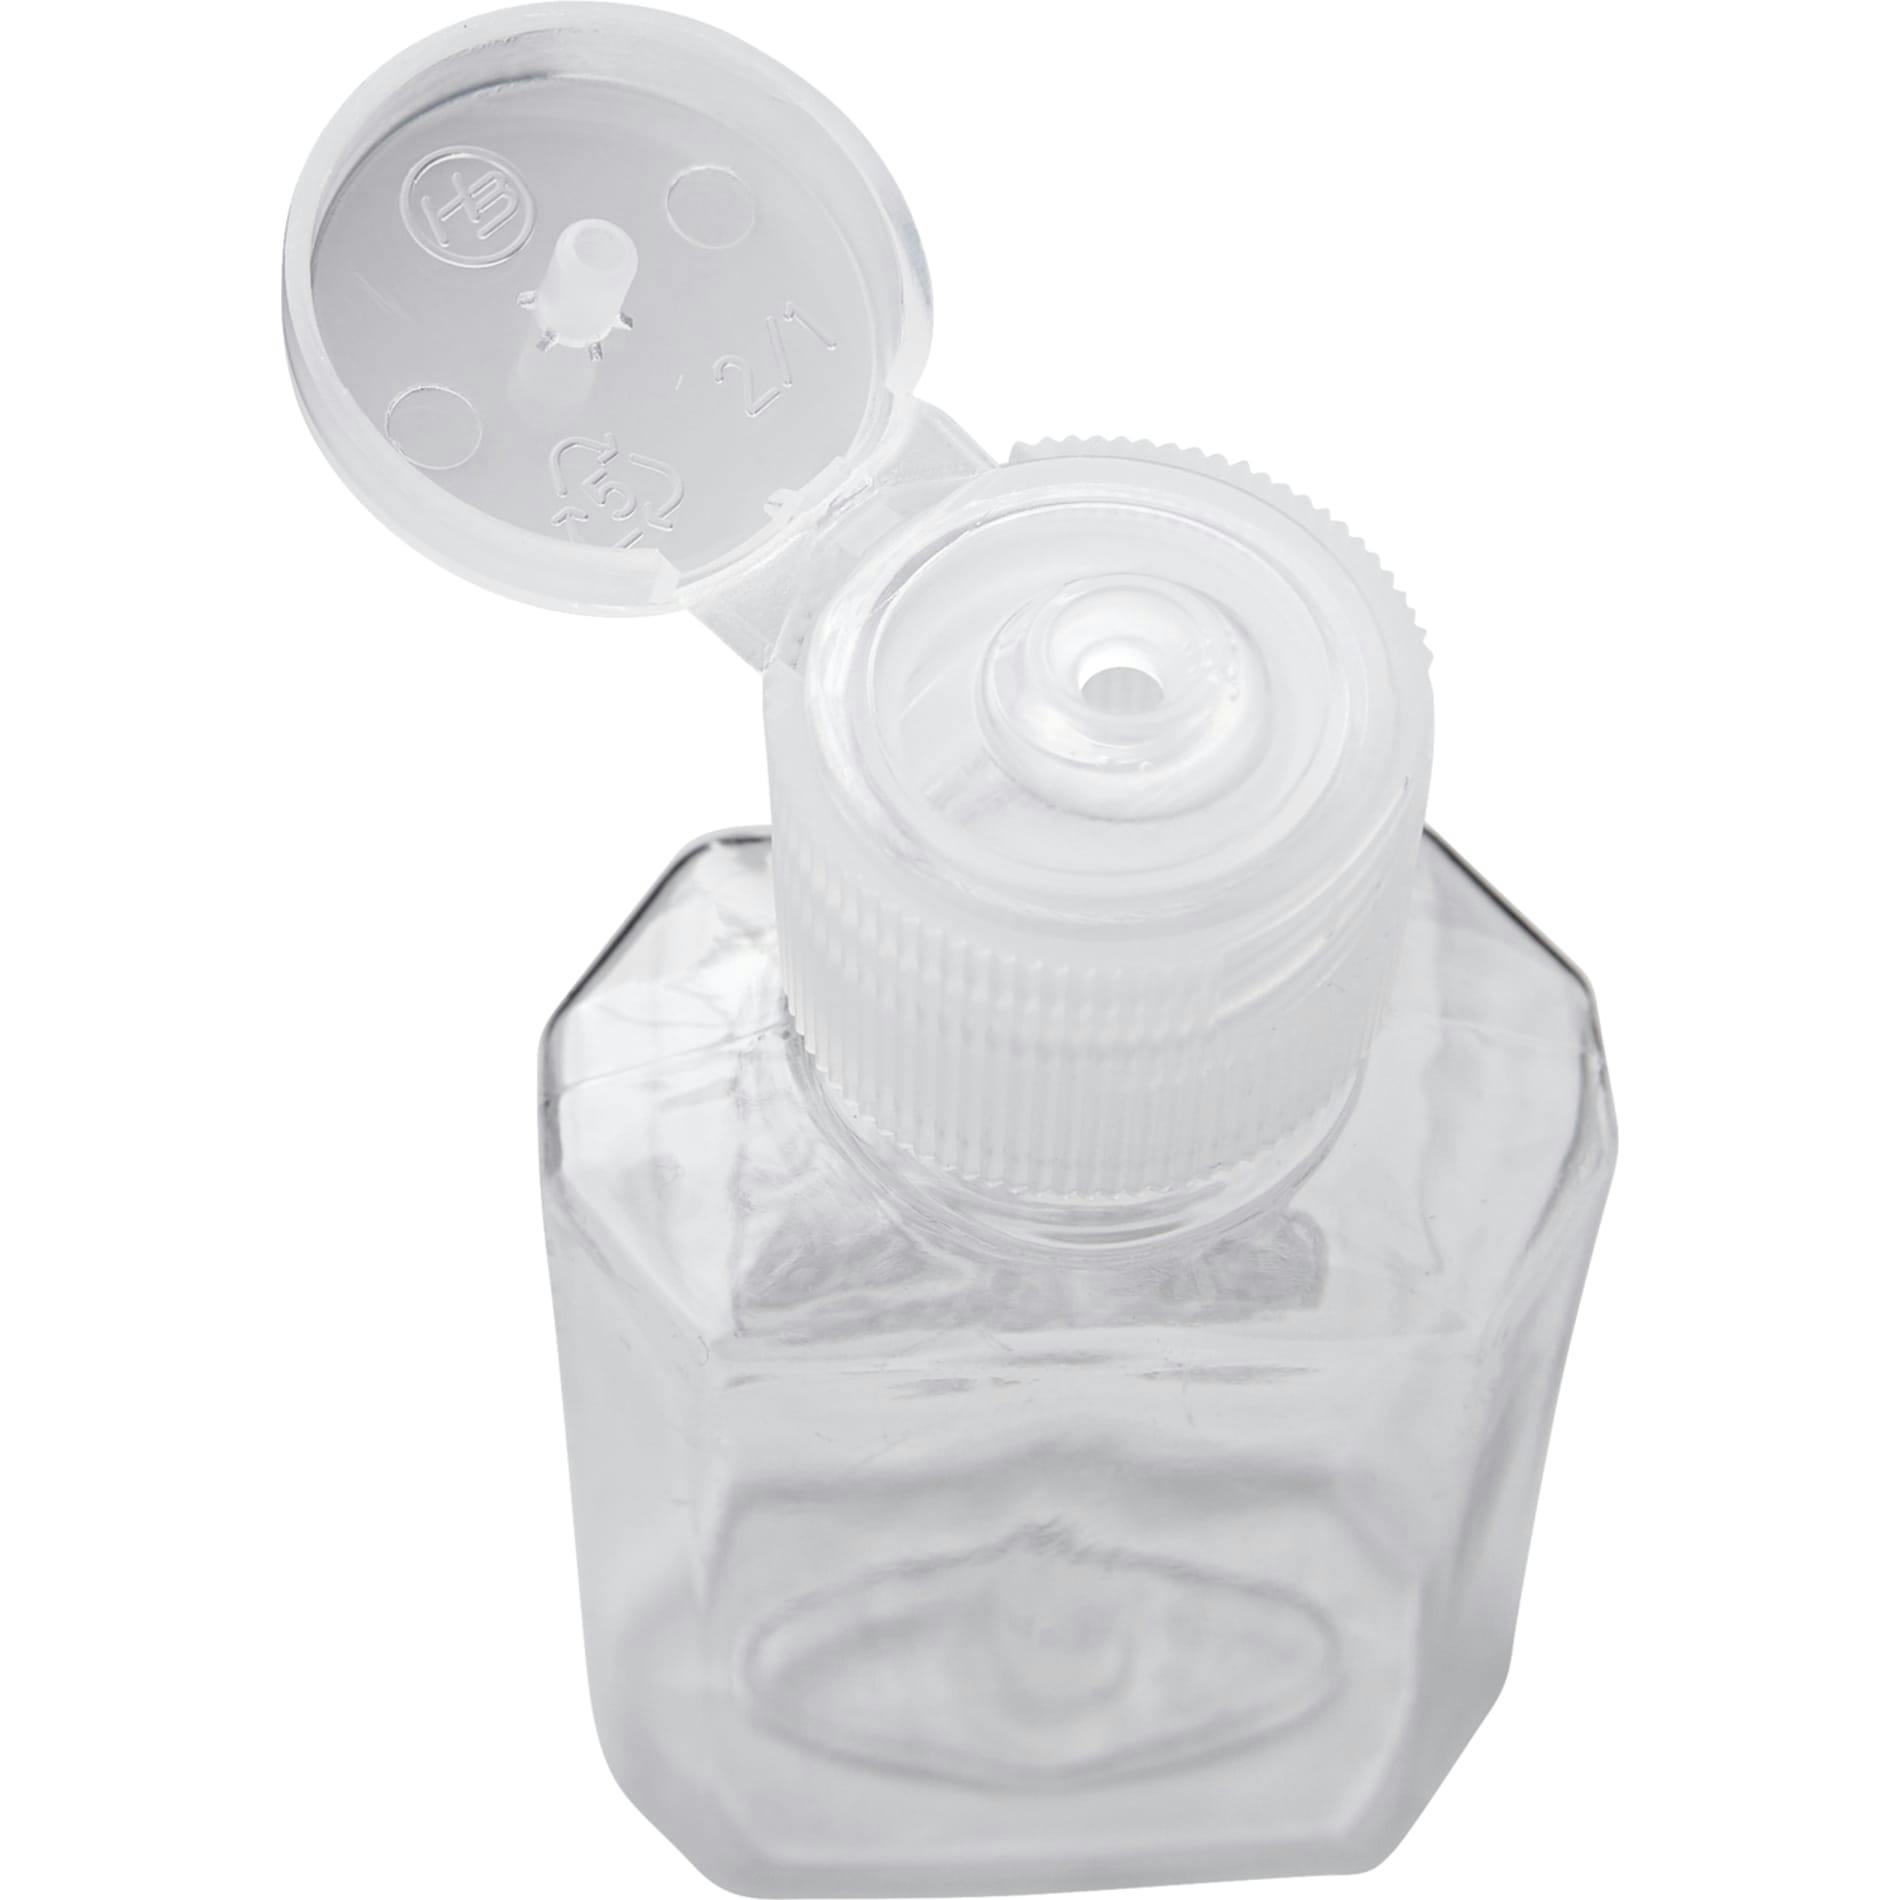 1oz Squirt Hand Sanitizer - additional Image 3